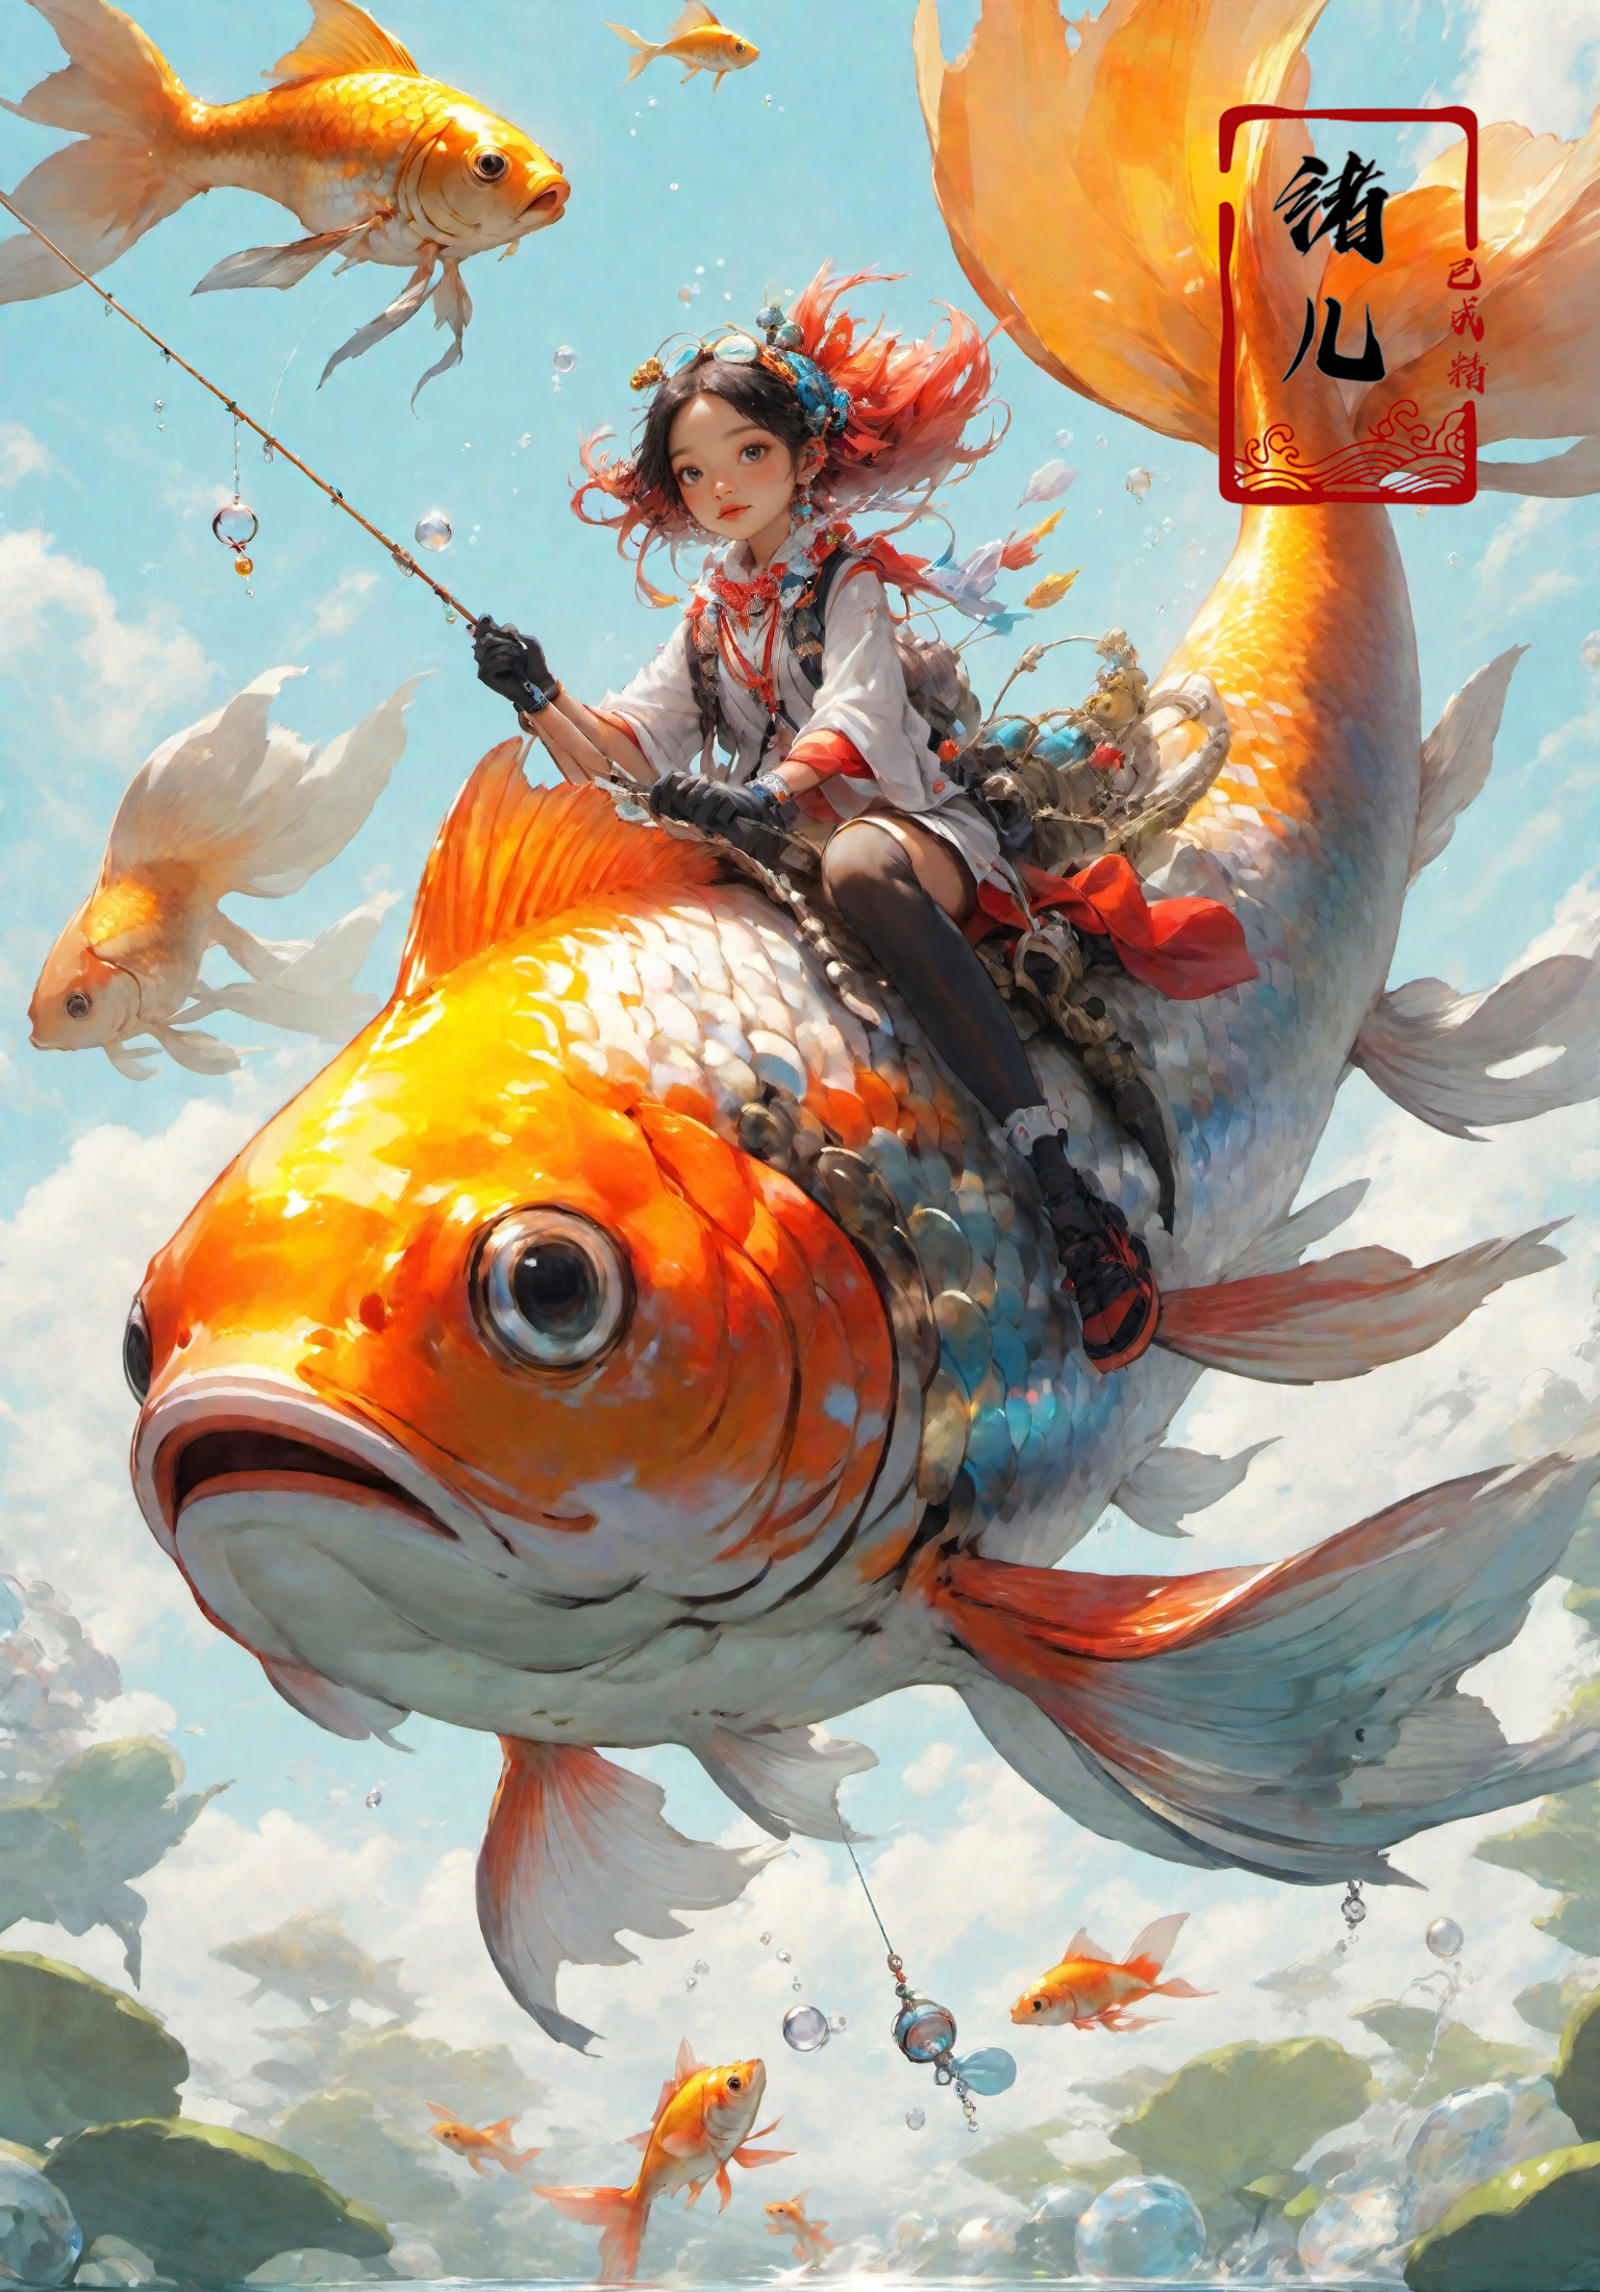 A young girl riding a kite shaped like a fish.